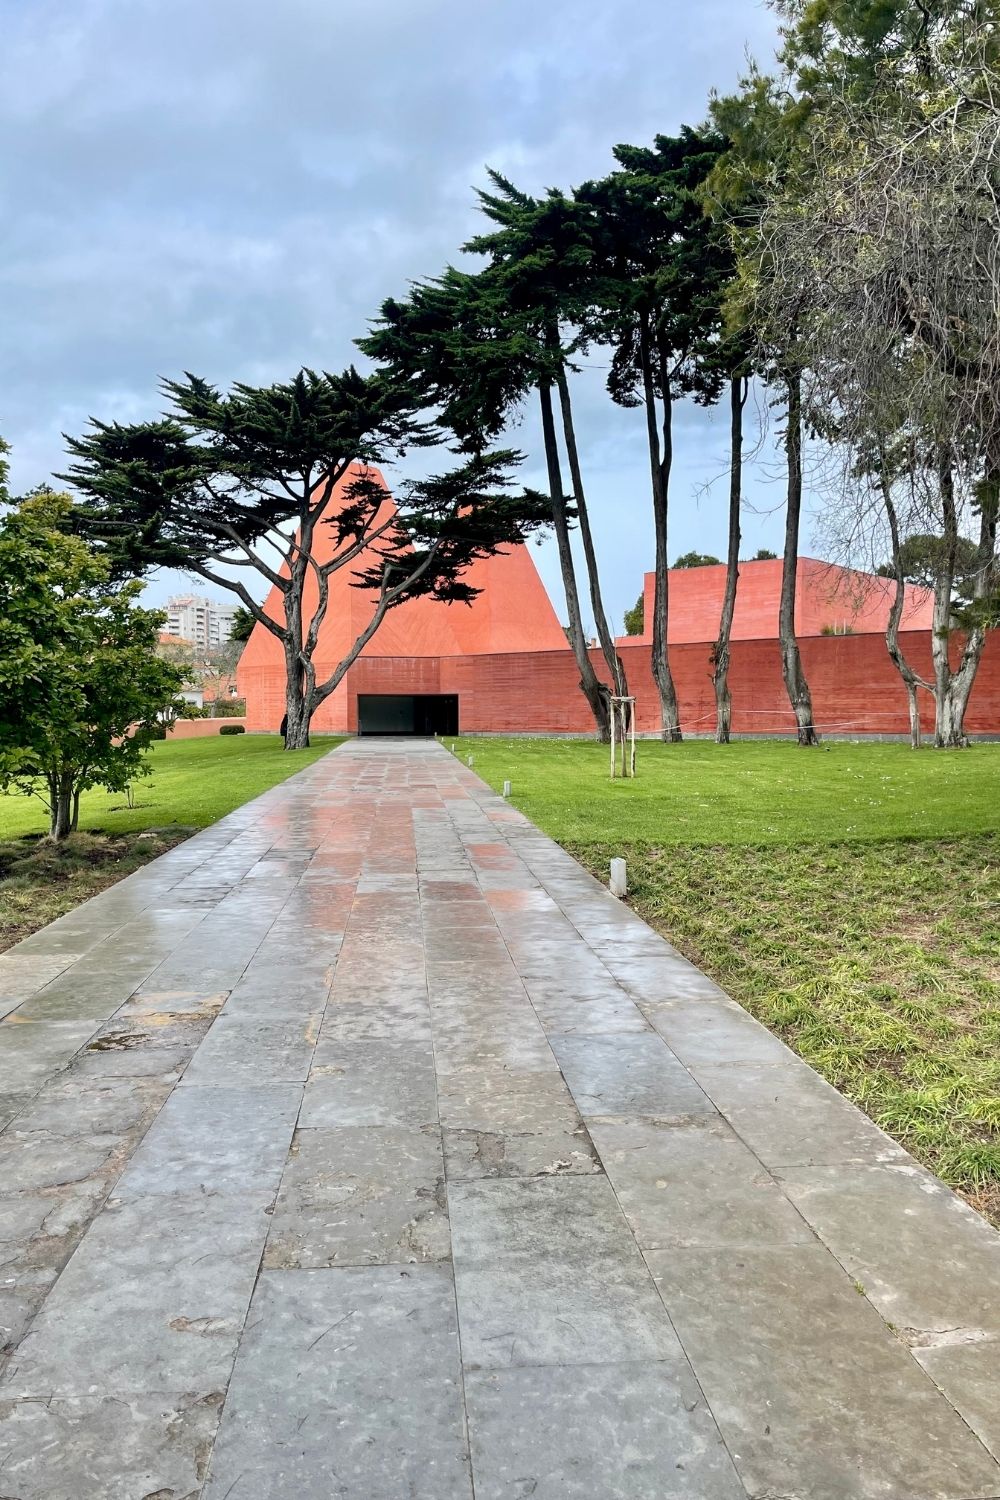 A pathway leading to the modern, terracotta-colored Paula Rego Museum in Cascais, Portugal, flanked by distinctive, windswept pine trees against a cloudy sky.